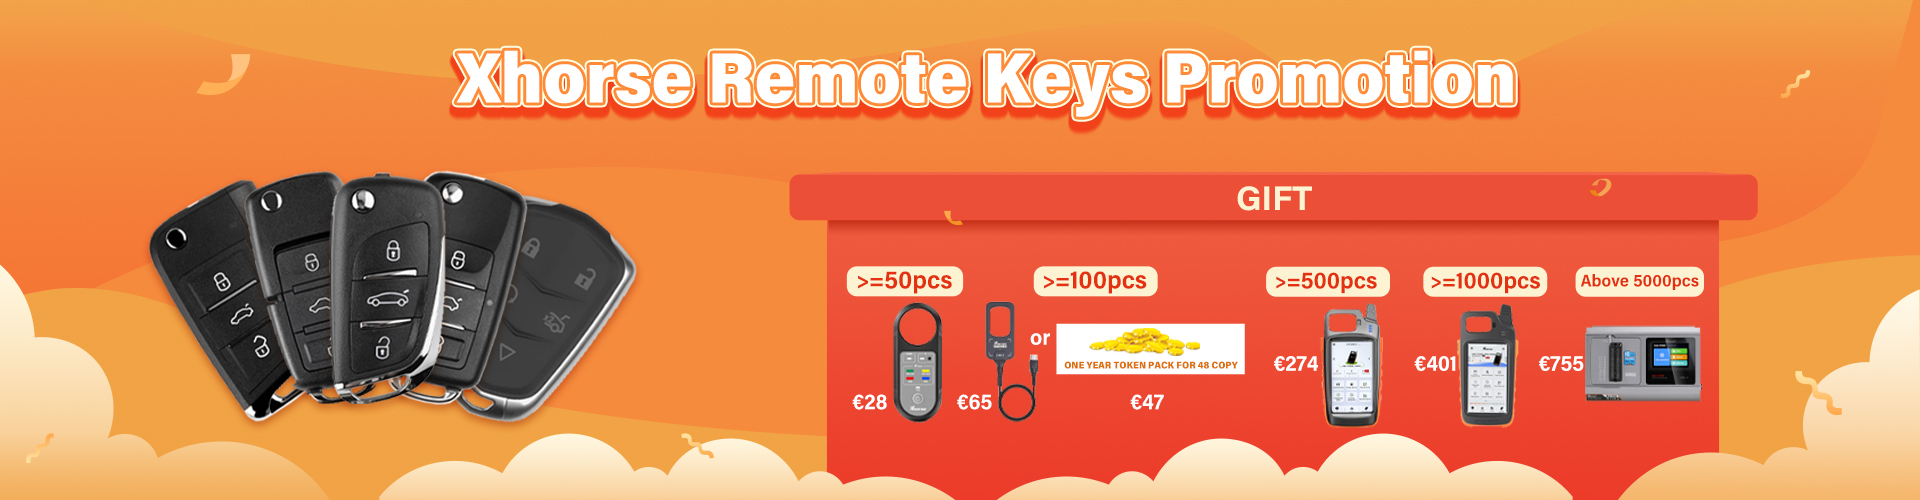 xhorse remote promotion